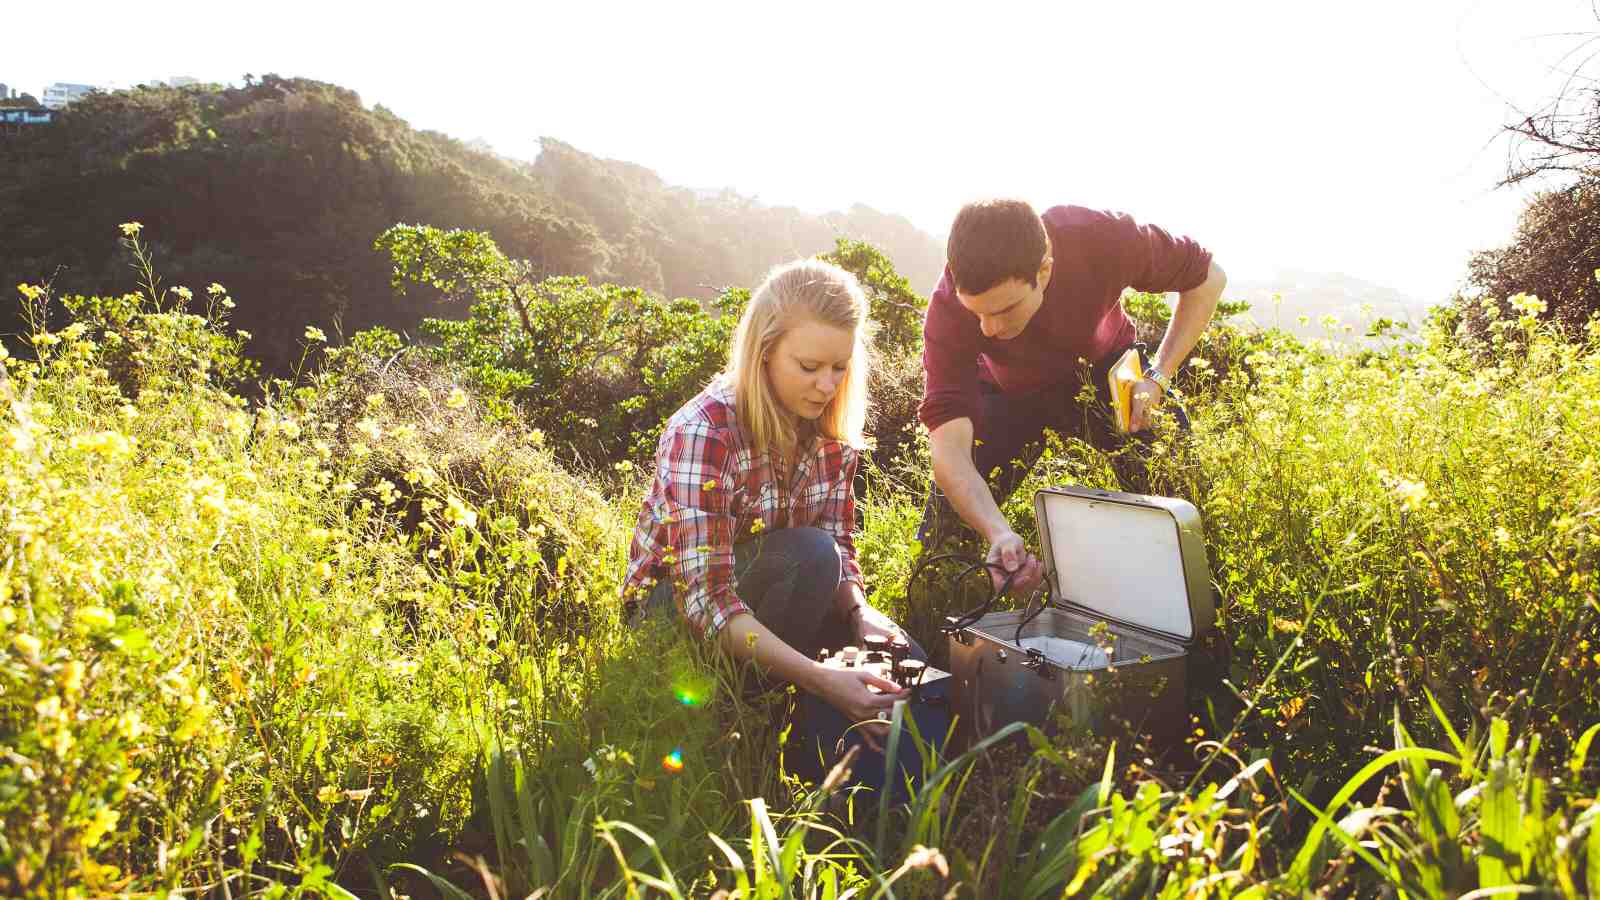 Two PhD students conducting a scientific experiment in a field.